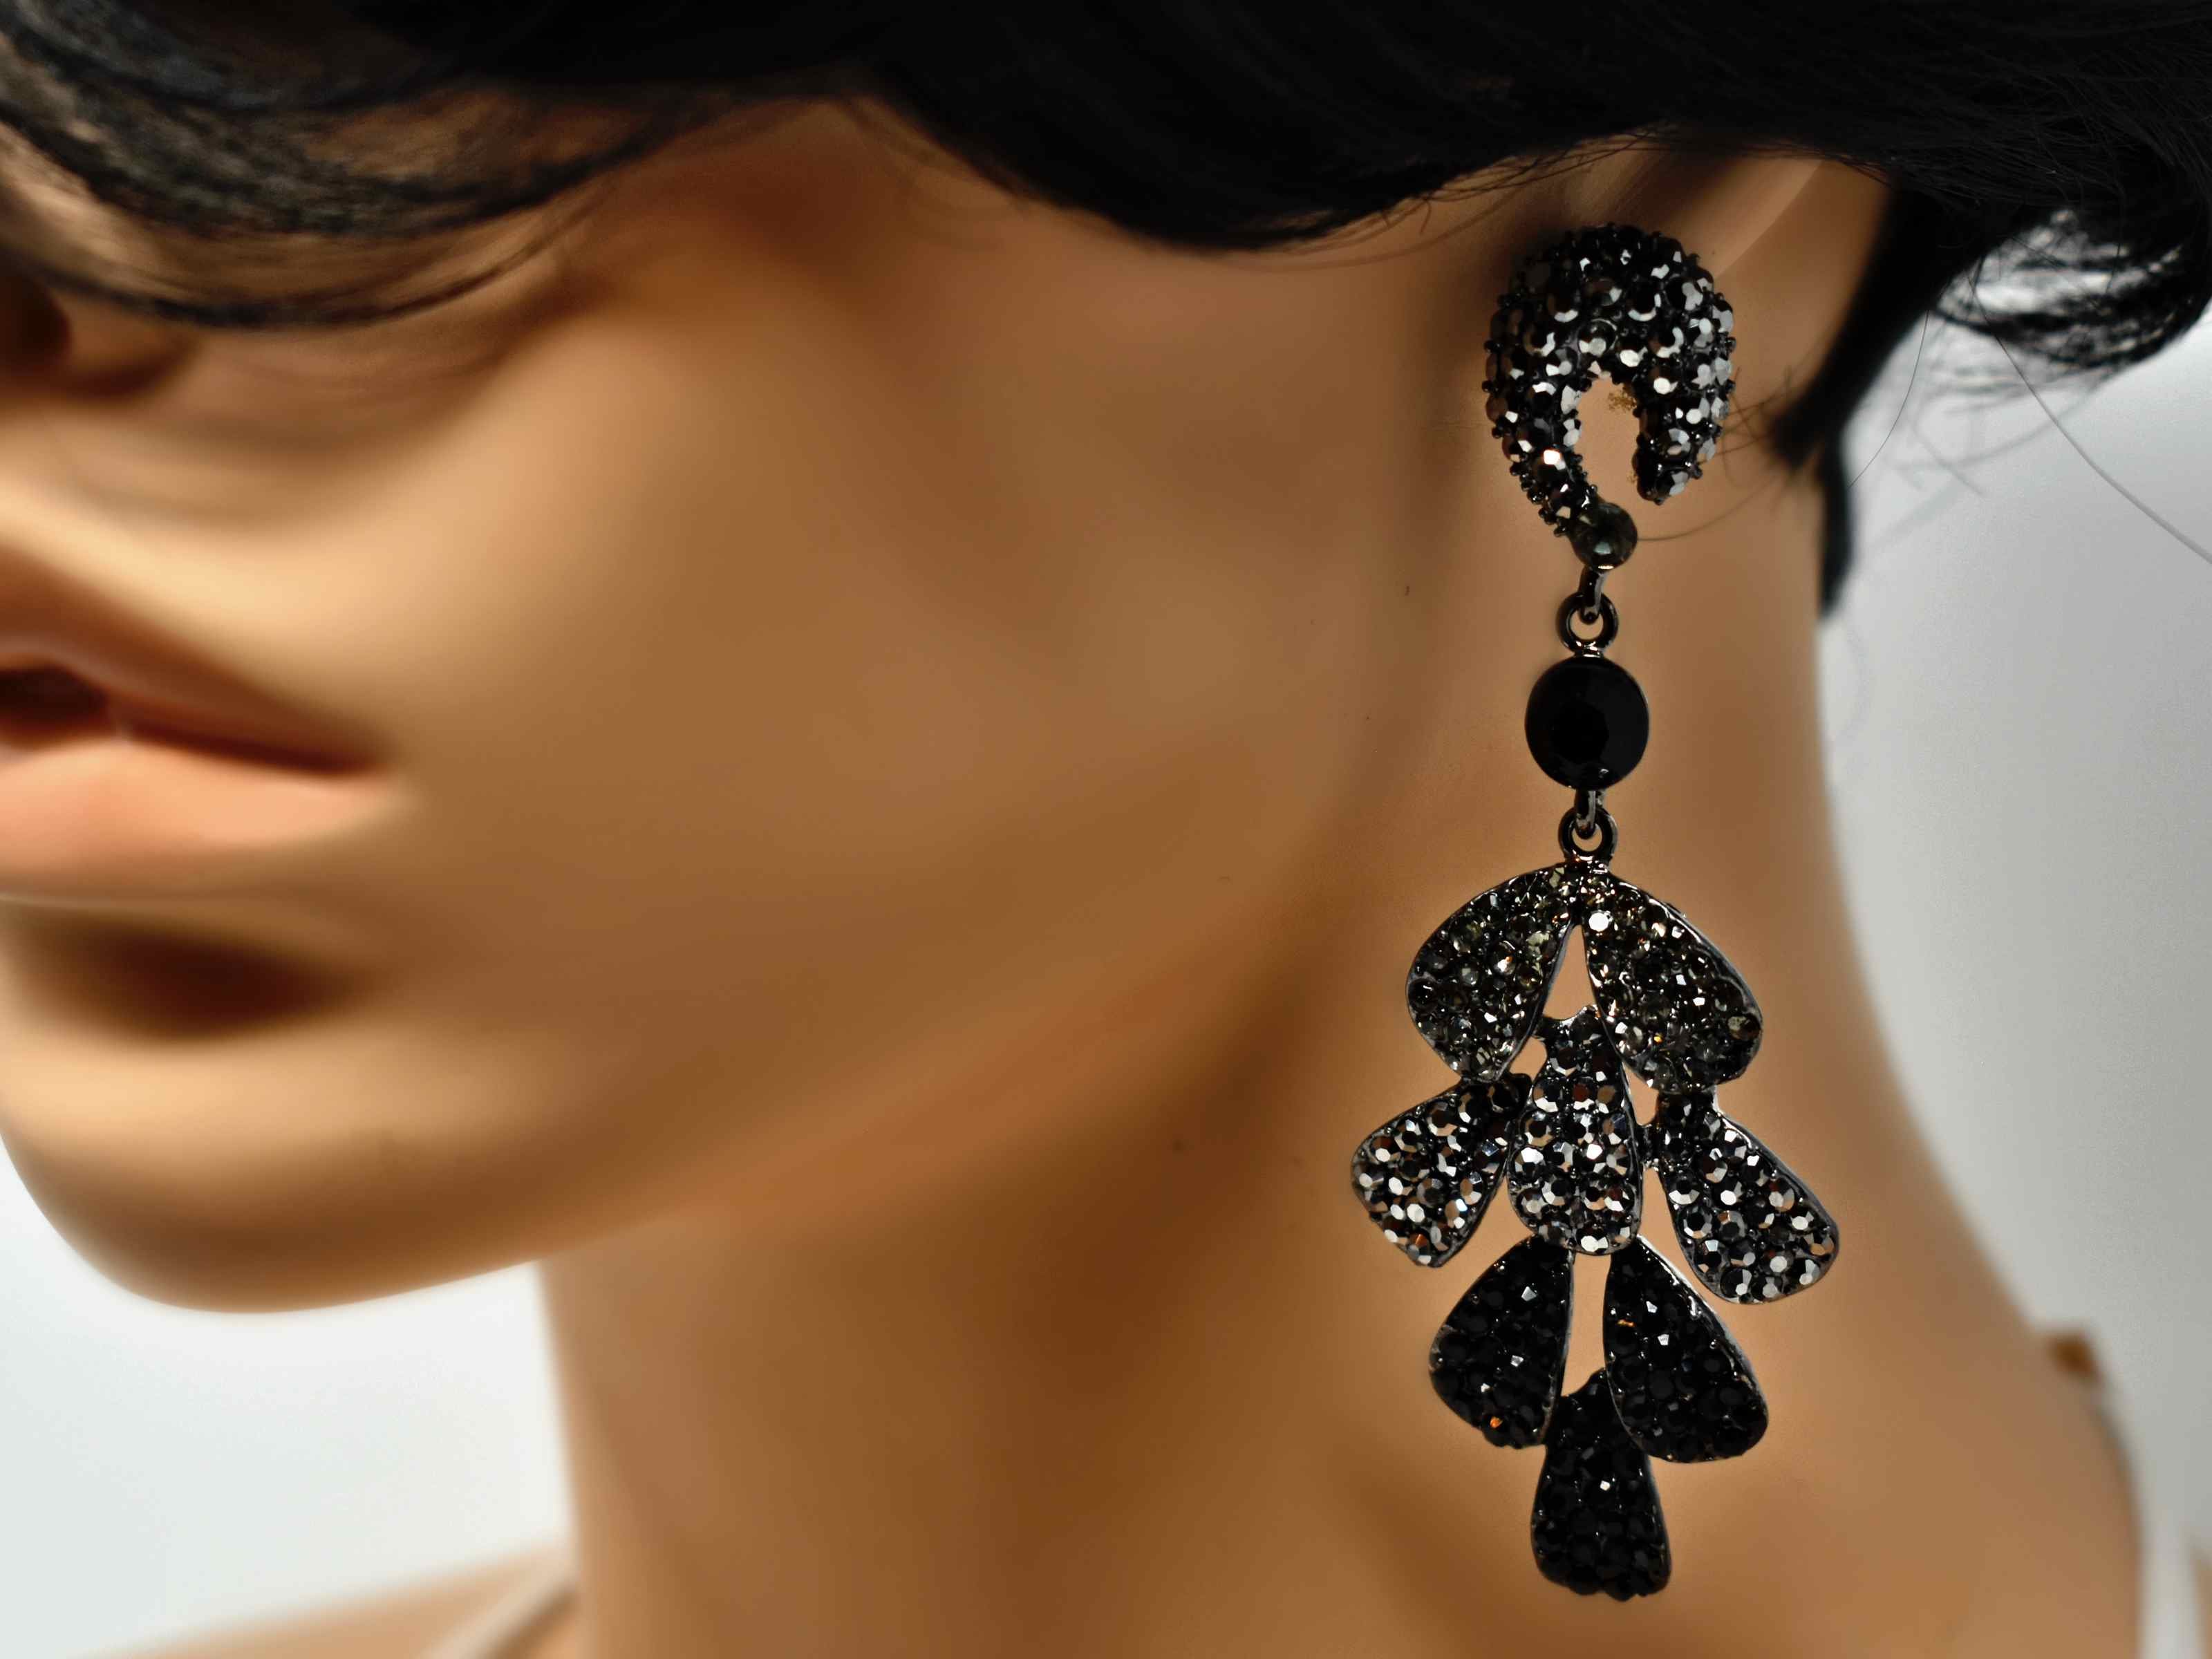 Our Erica Pewter dark silver earrings is designed to stand out from the crowd. These statement drop earrings are three tiered design accented with grey pewter and black stones. It is 3 1/2 inches in length with a push back clasp.